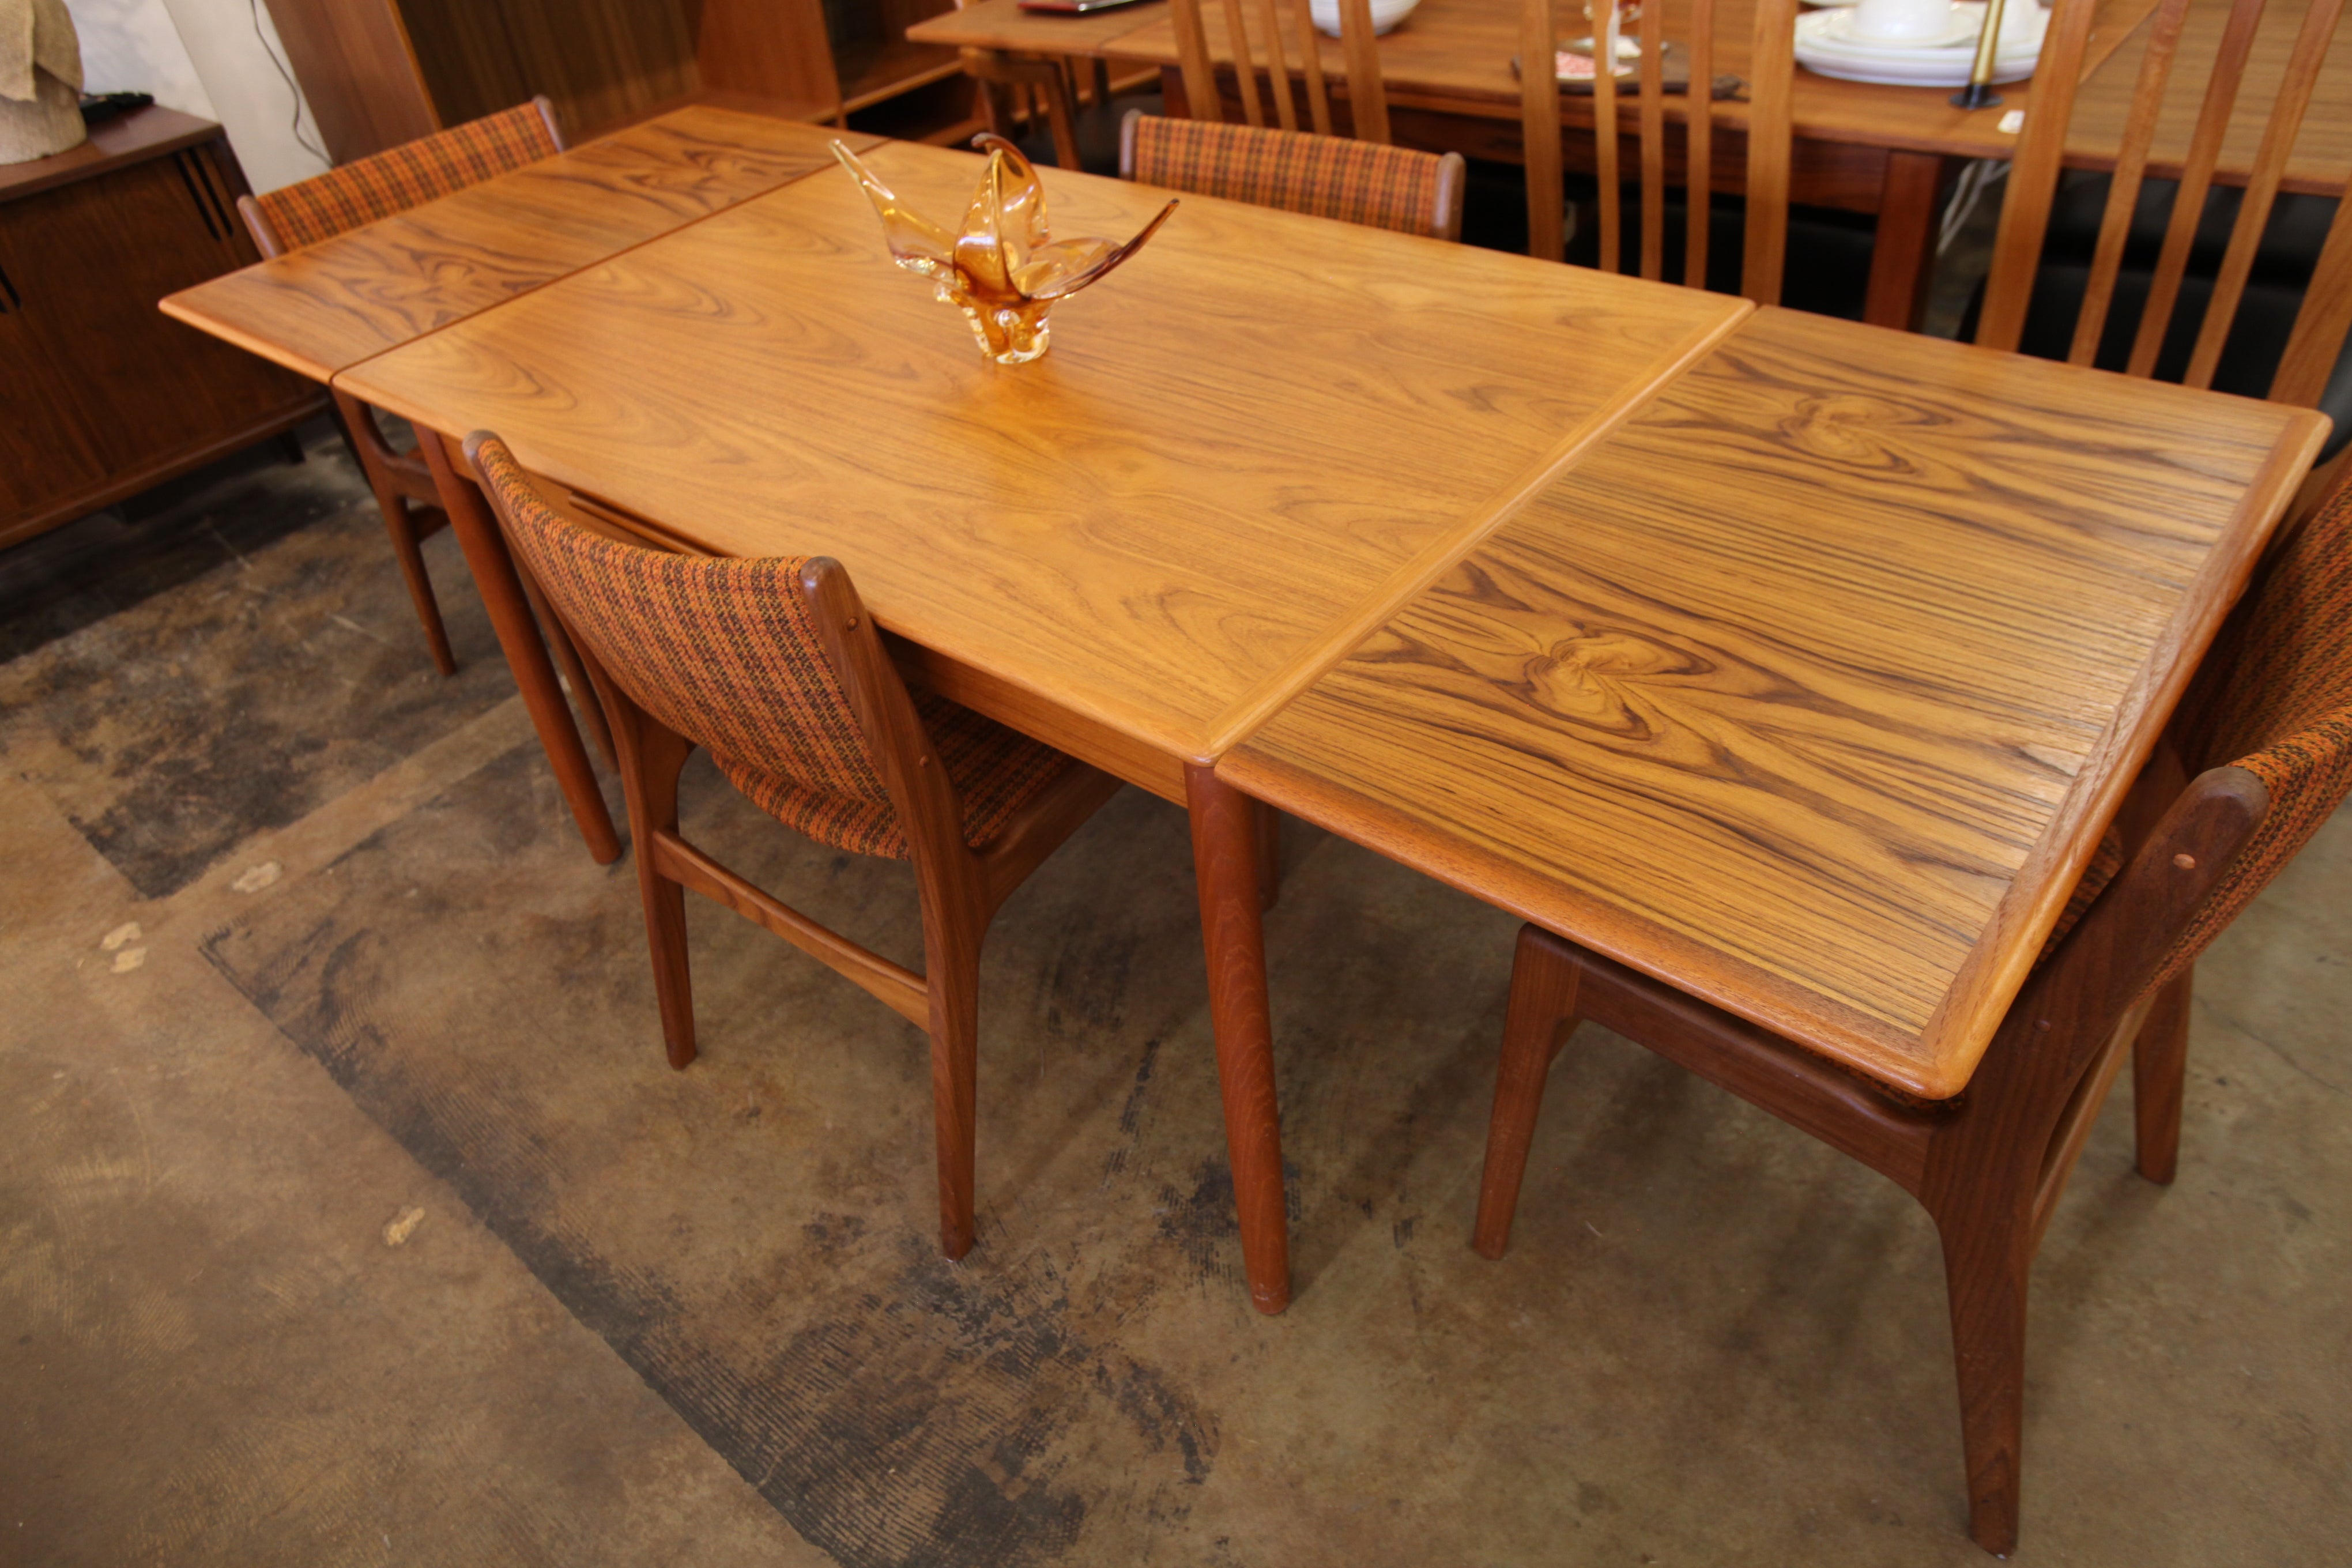 Vintage Danish Teak Dining Table with Extensions (86.75"x33.75")(49.5"x33.75") 29"H